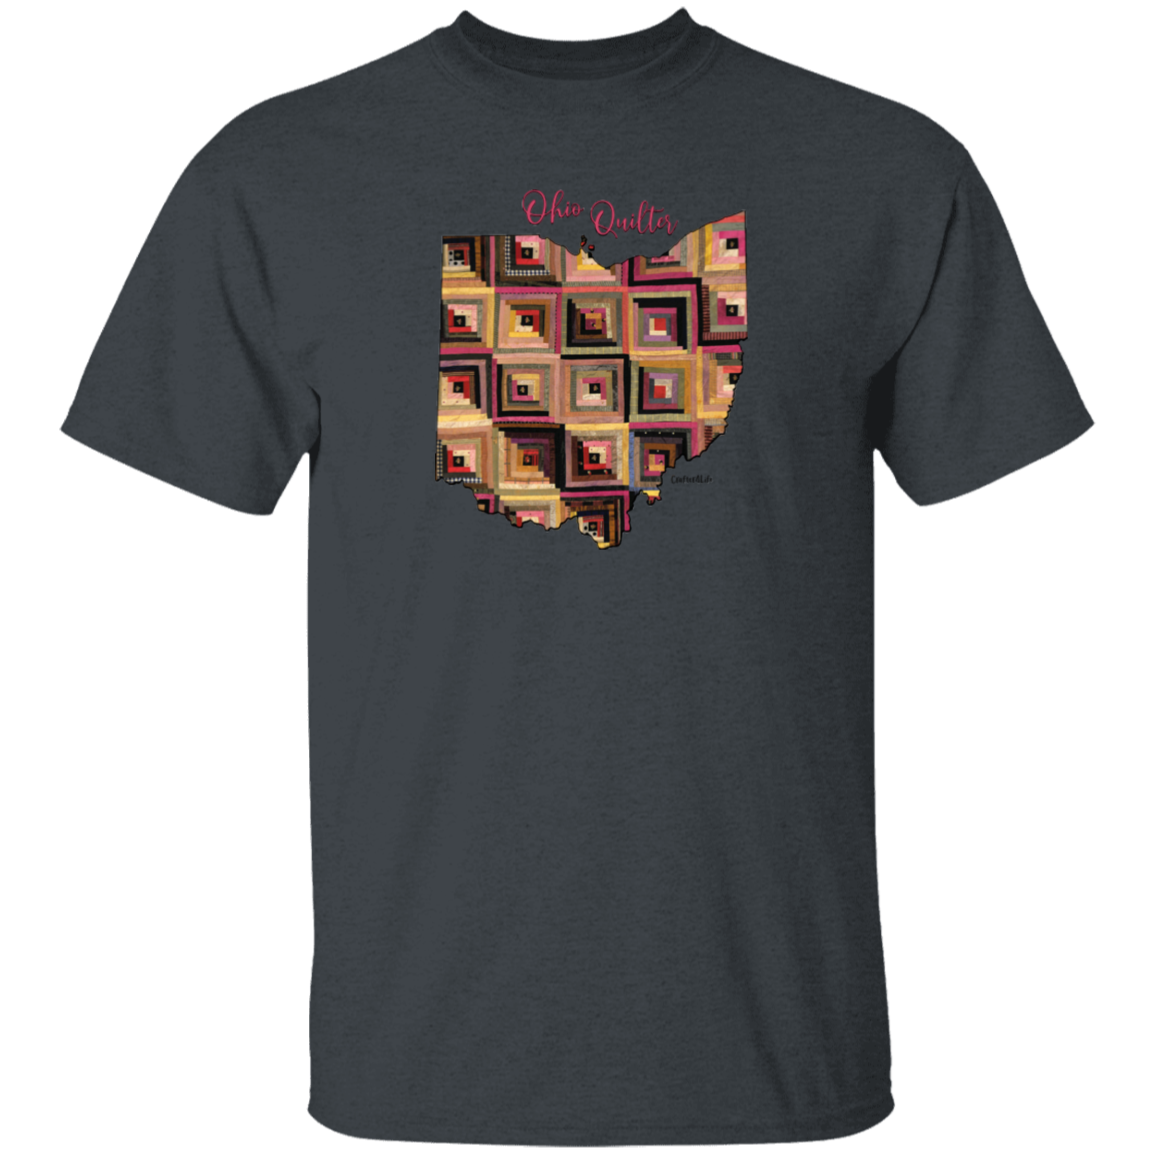 Ohio Quilter T-Shirt, Gift for Quilting Friends and Family